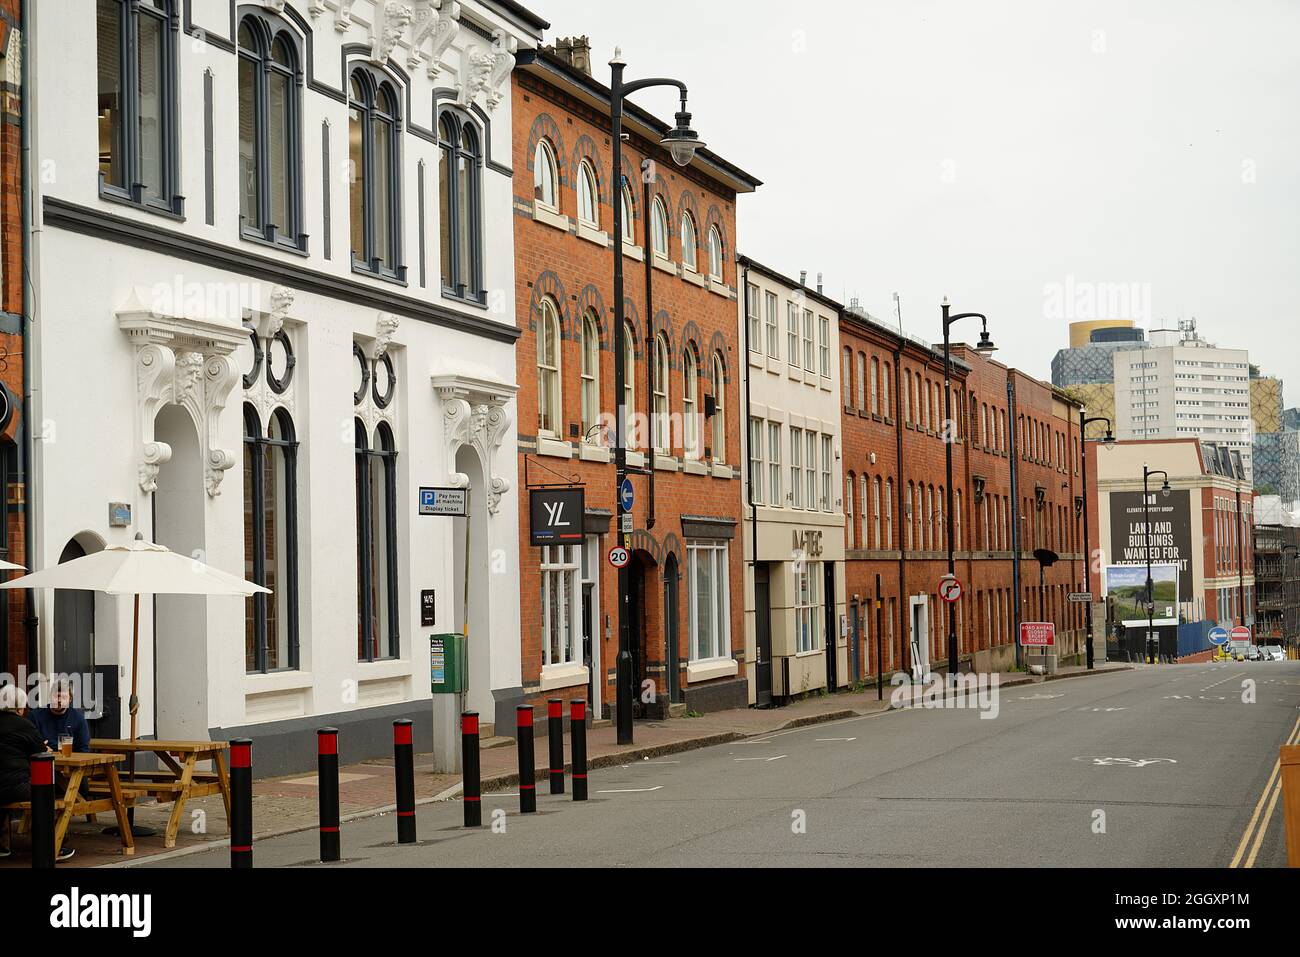 The Jewellery quarter in Birmingham, England. Buildings in central Birmingham that in the past and the present, house jewellery companies. Stock Photo